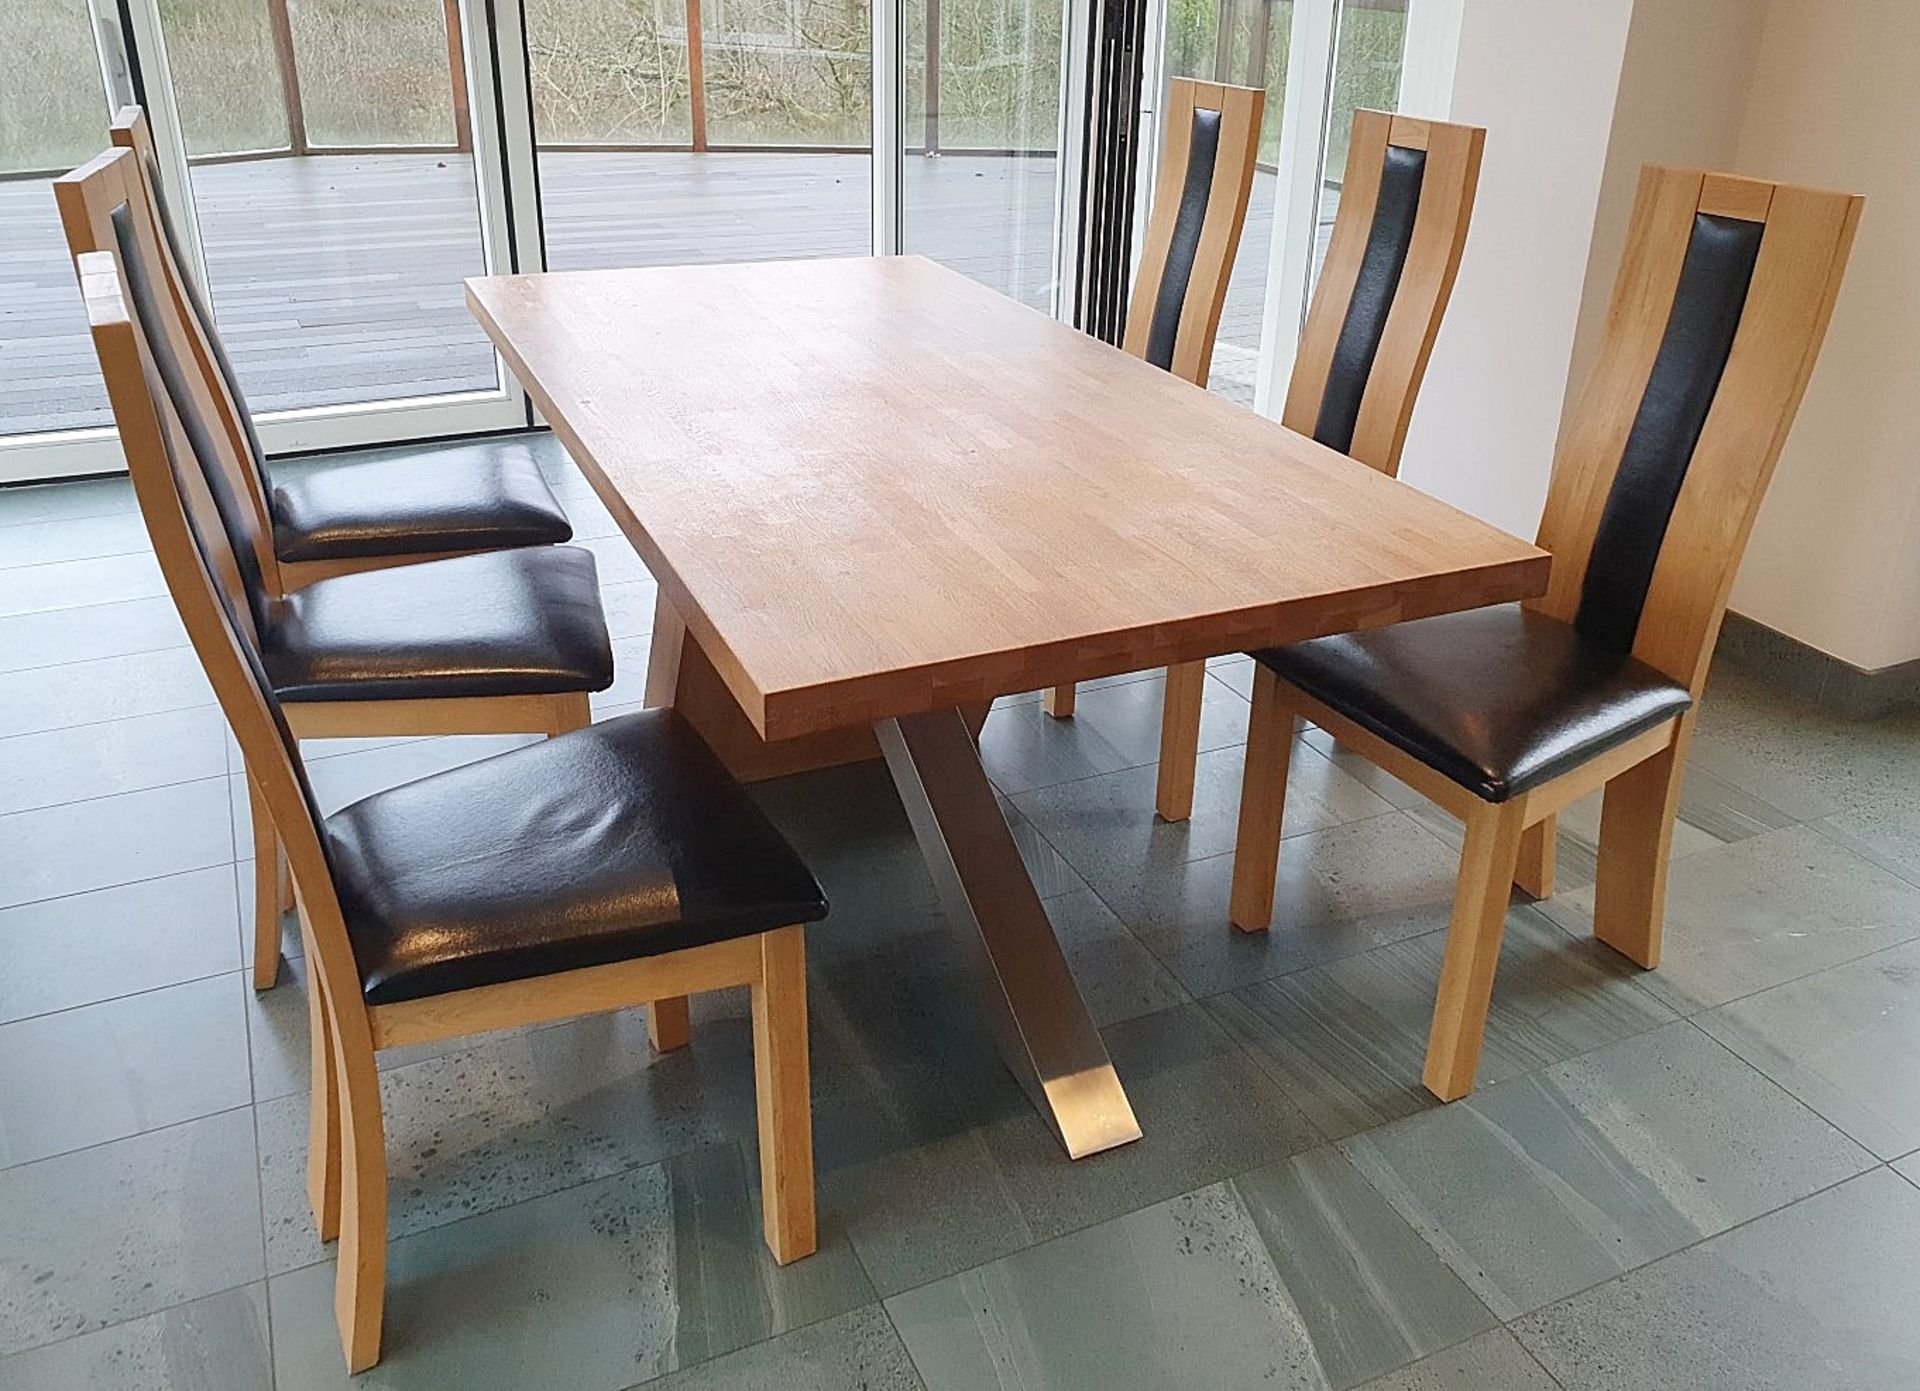 1 x Solid Oak 1.8 Metre Dining Table With 6 x High Back Dining Chairs - Pre-owned In Great Condition